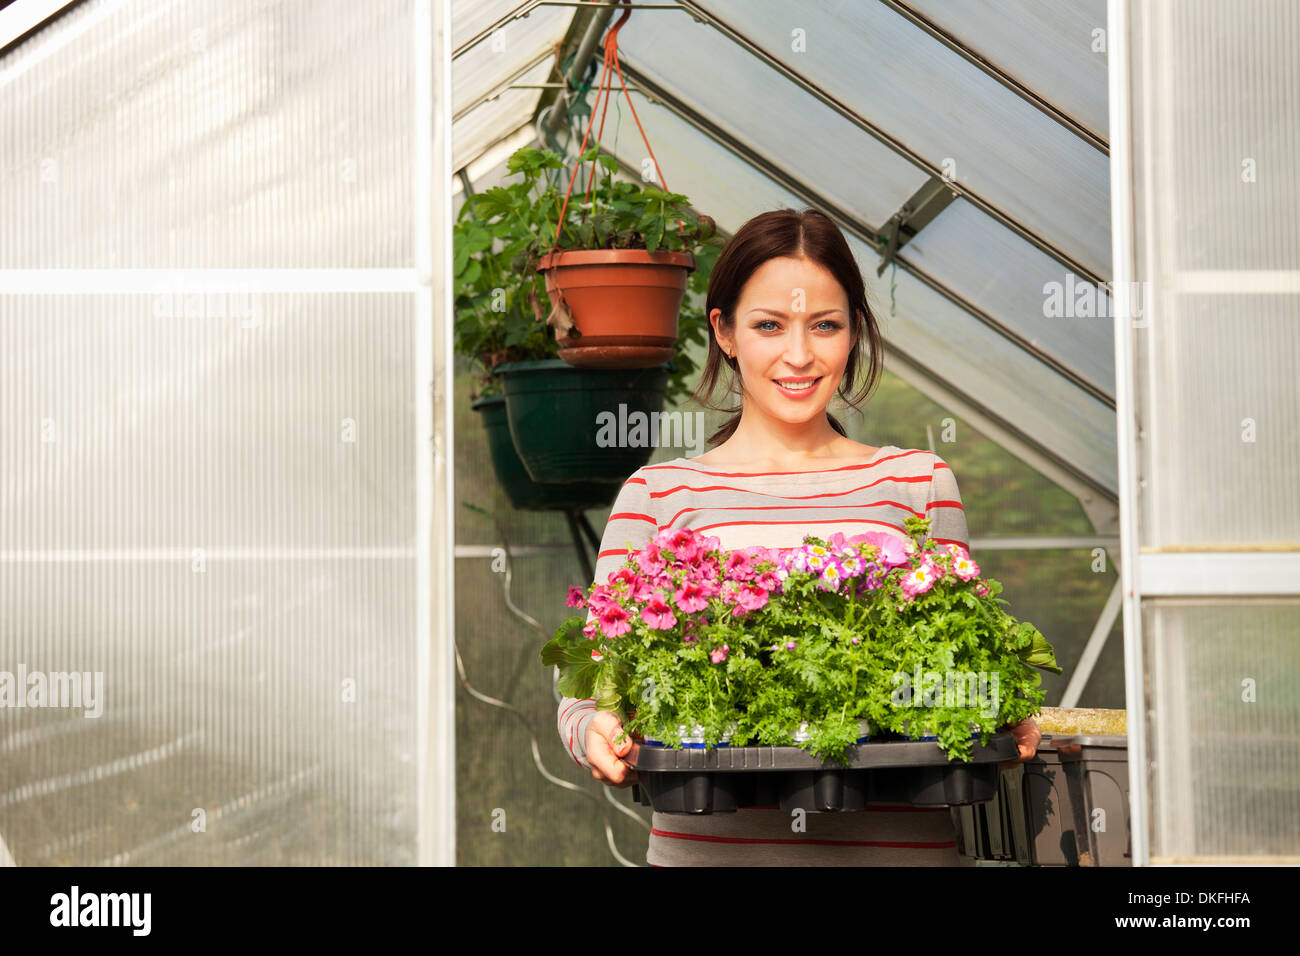 Young woman holding plants Stock Photo